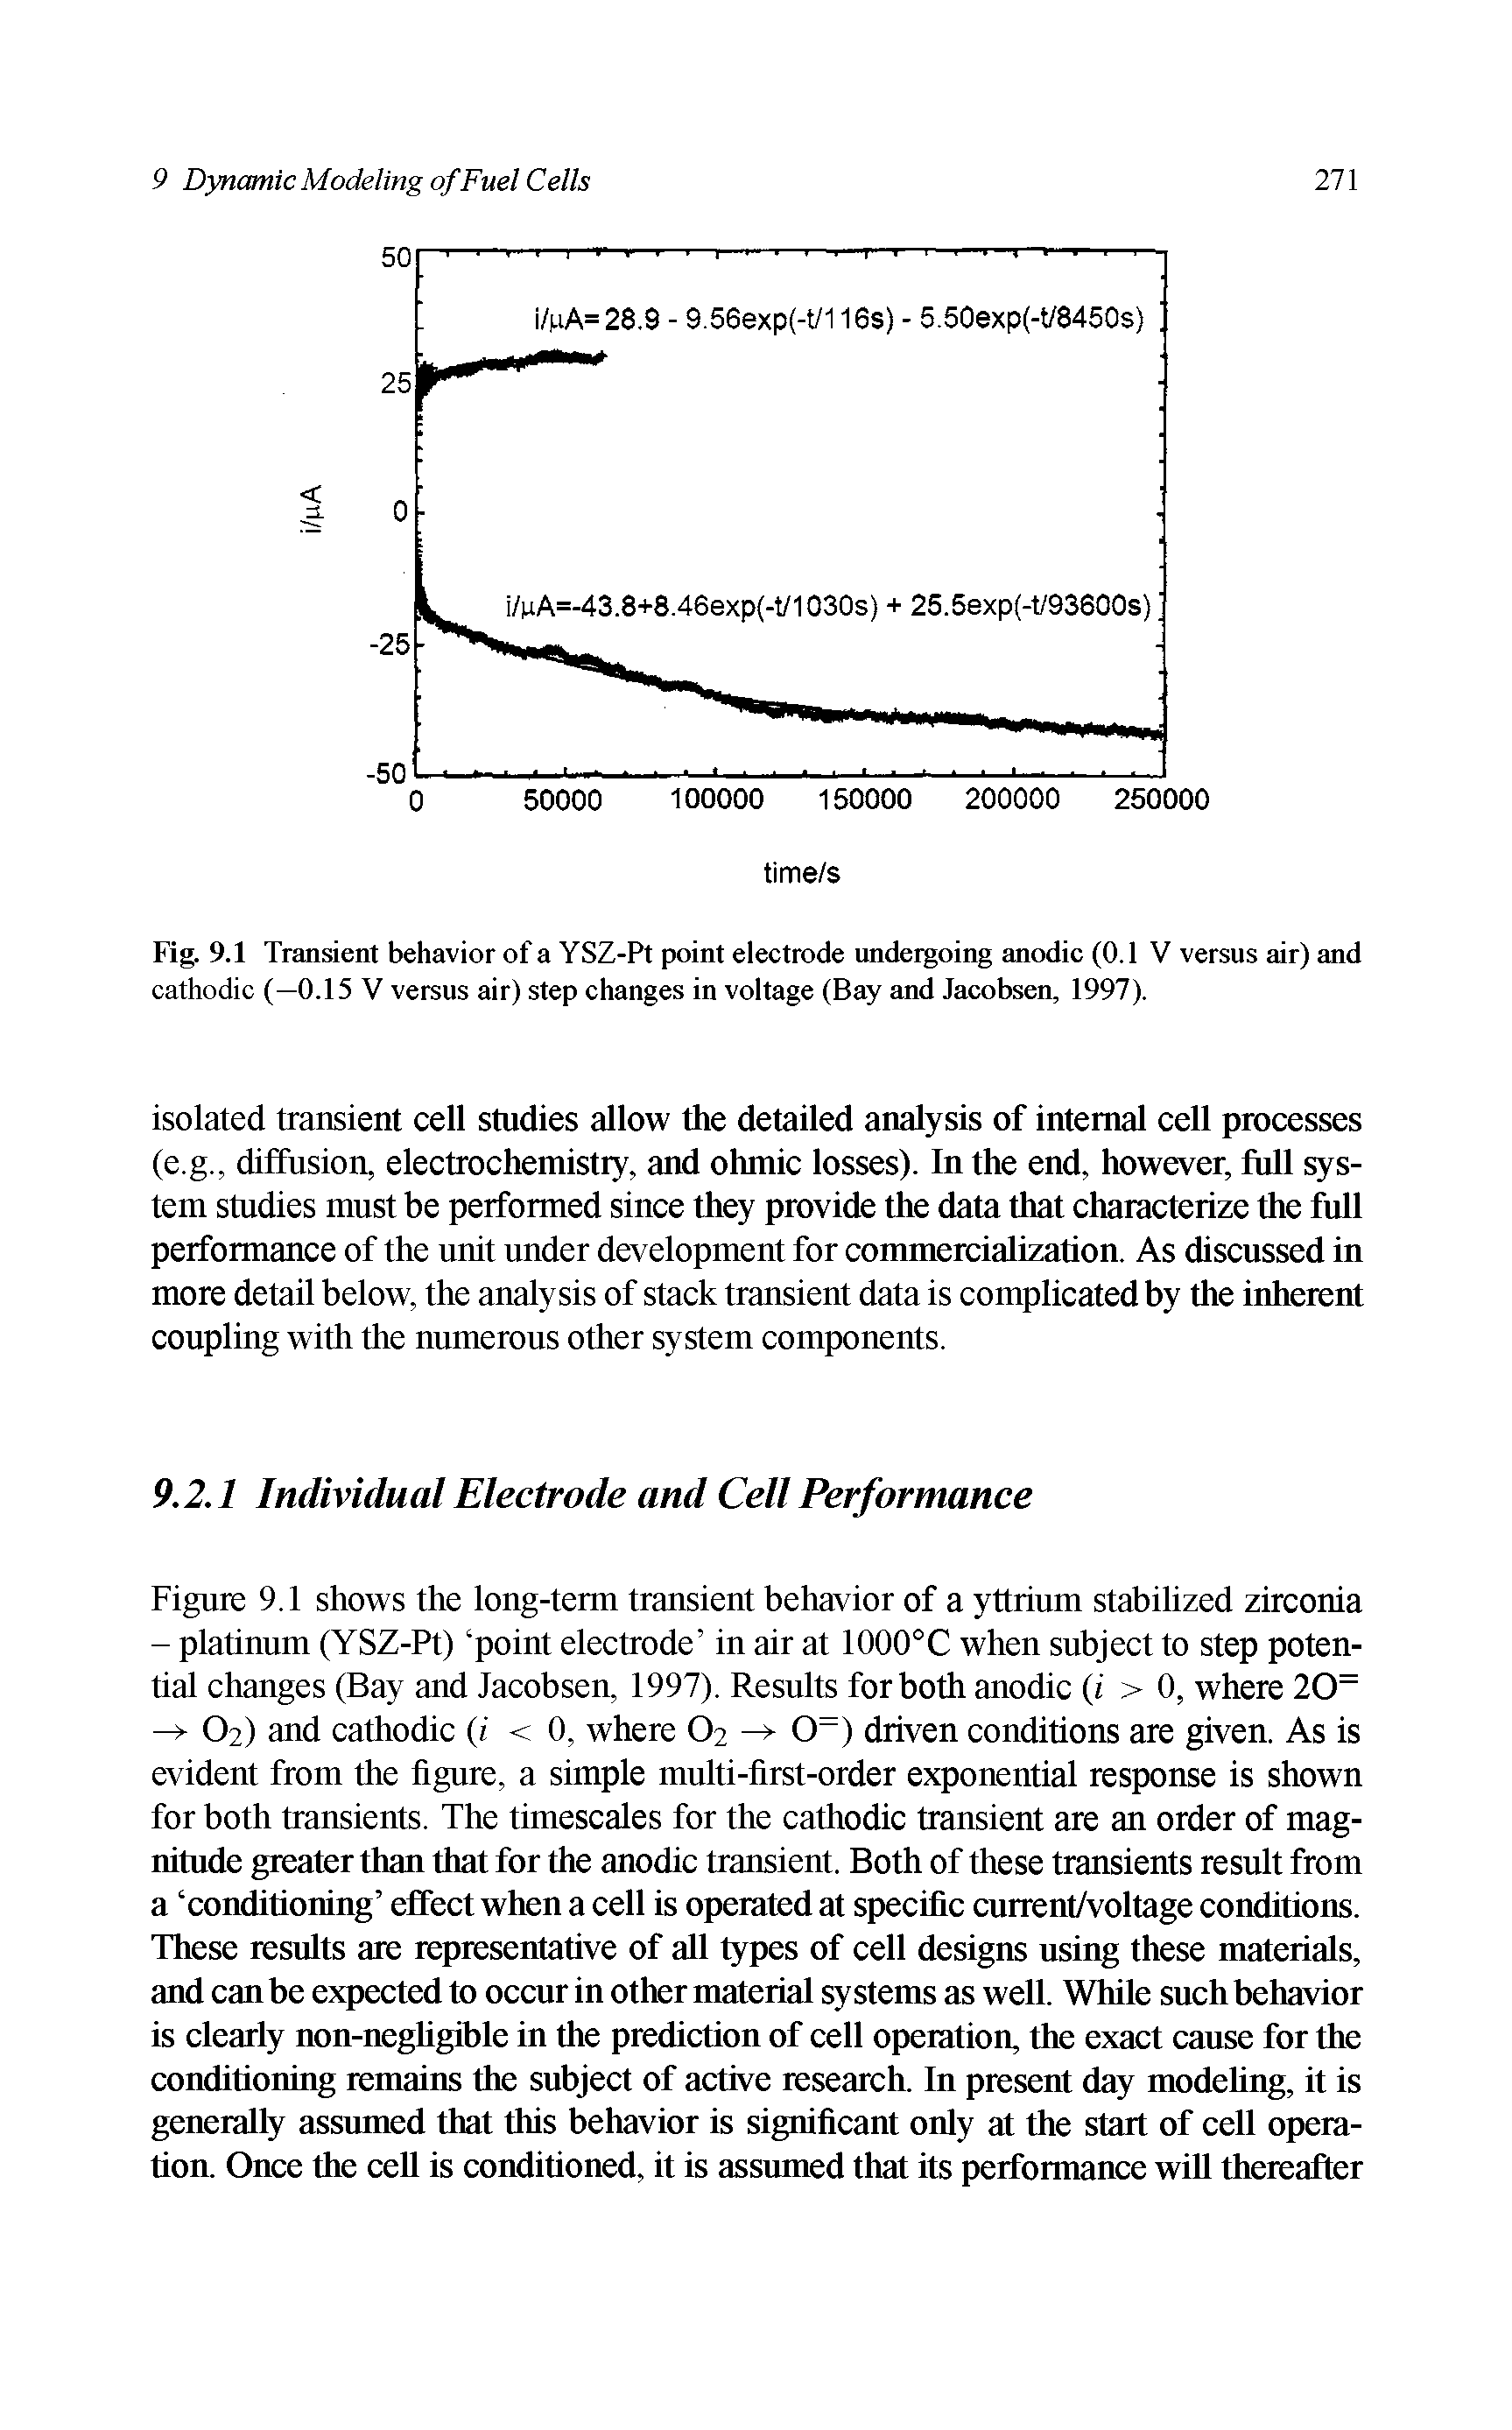 Fig. 9.1 Transient behavior of a YSZ-Pt point electrode undergoing anodic (0.1 V versus air) and cathodic (—0.15 V versus air) step changes in voltage (Bay and Jacobsen, 1997).